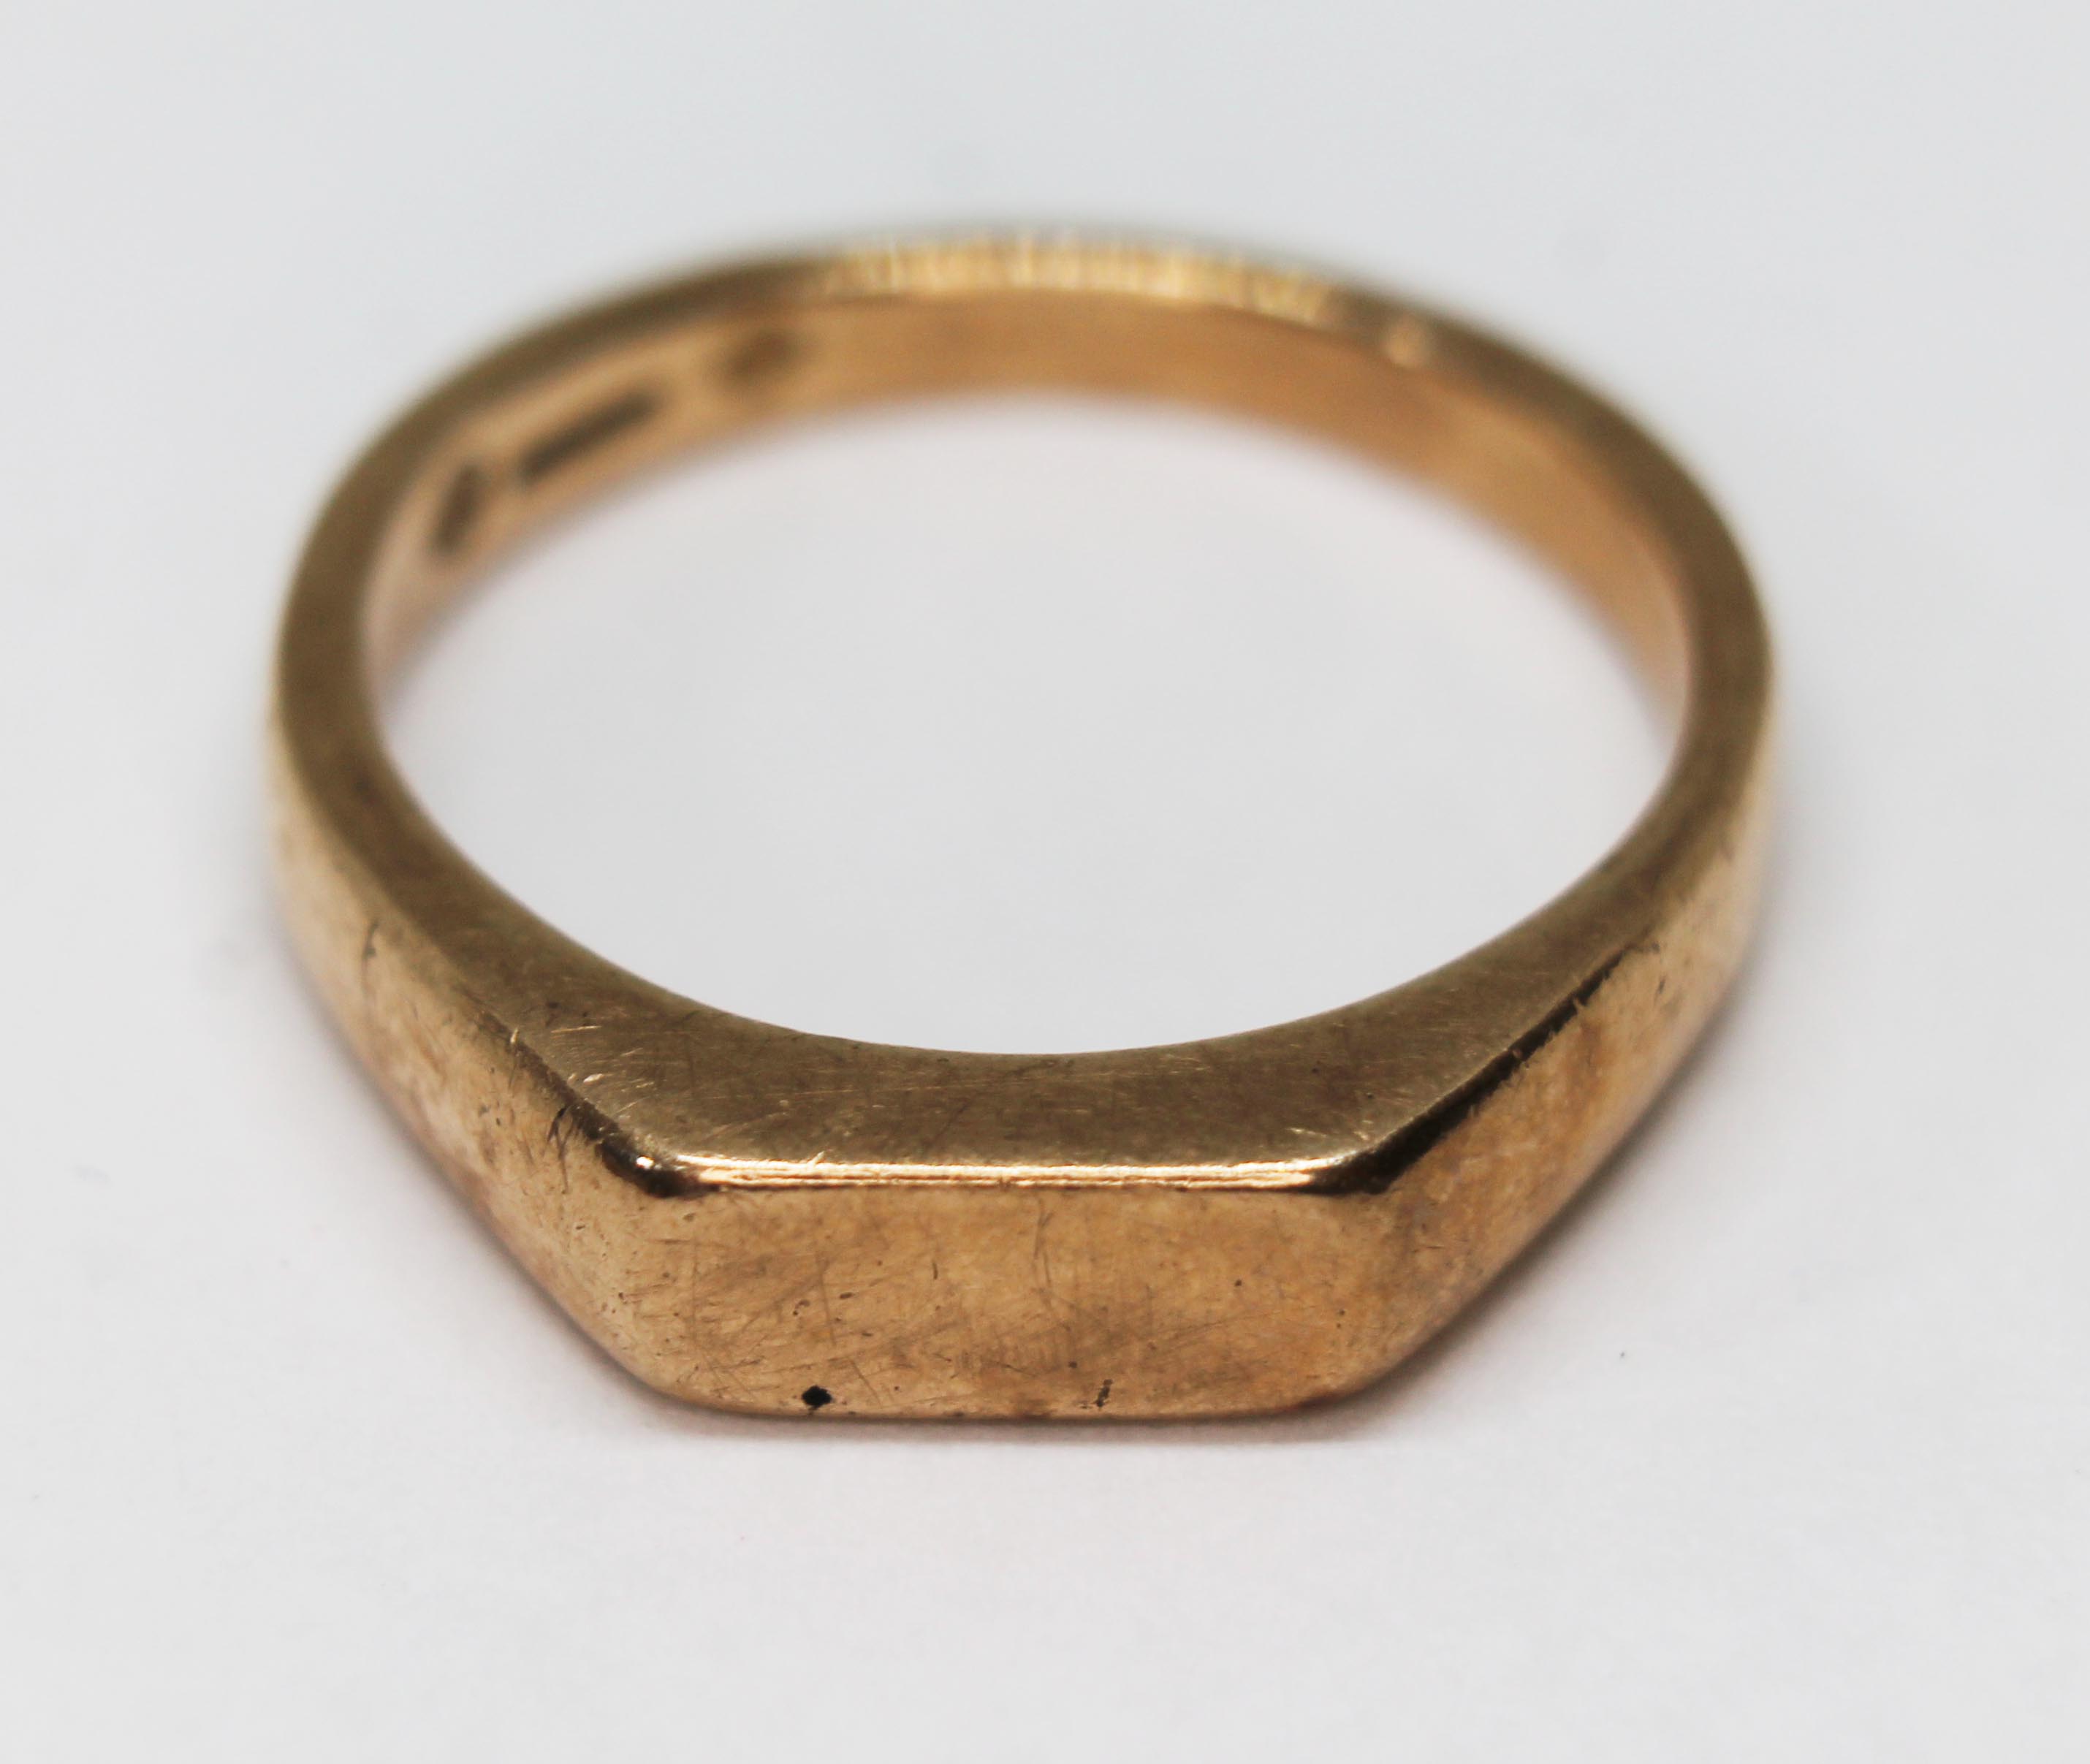 A hallmarked 9ct gold signet ring, wt. 5.8g, size S.